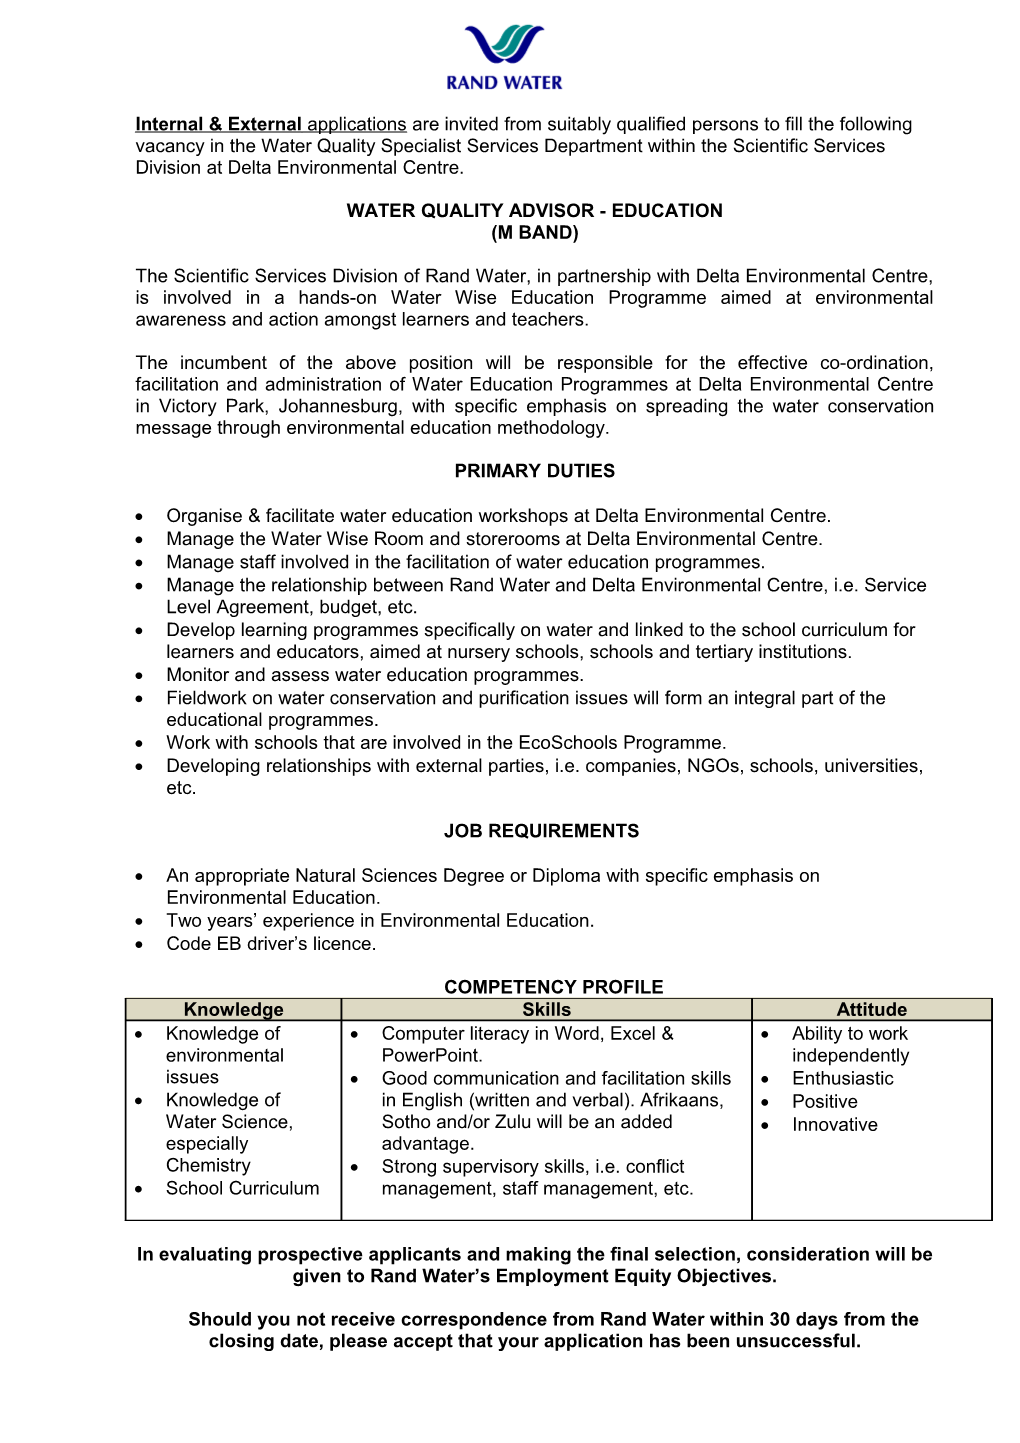 Applications Are Invited from Suitably Qualified Persons to Fill the Following Vacancy